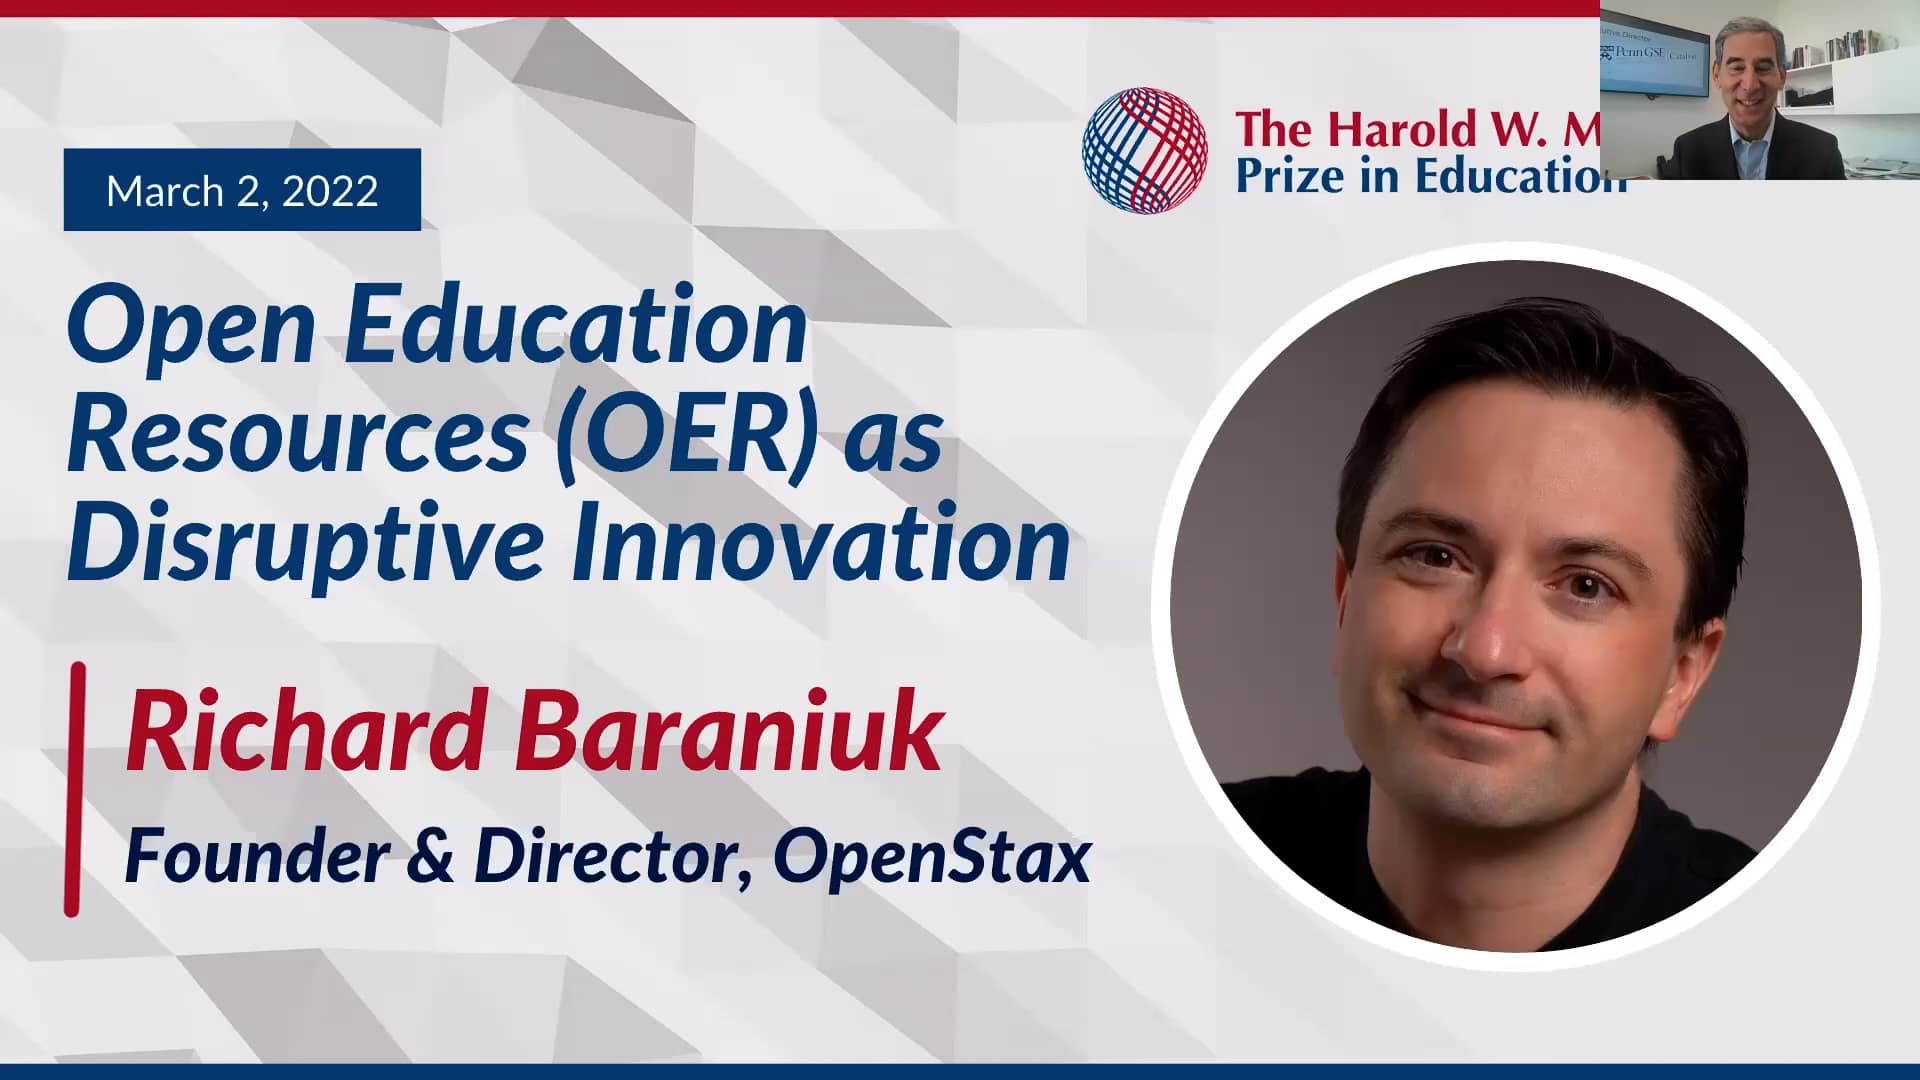 Open Education Resources (OER) as Disruptive Innovation